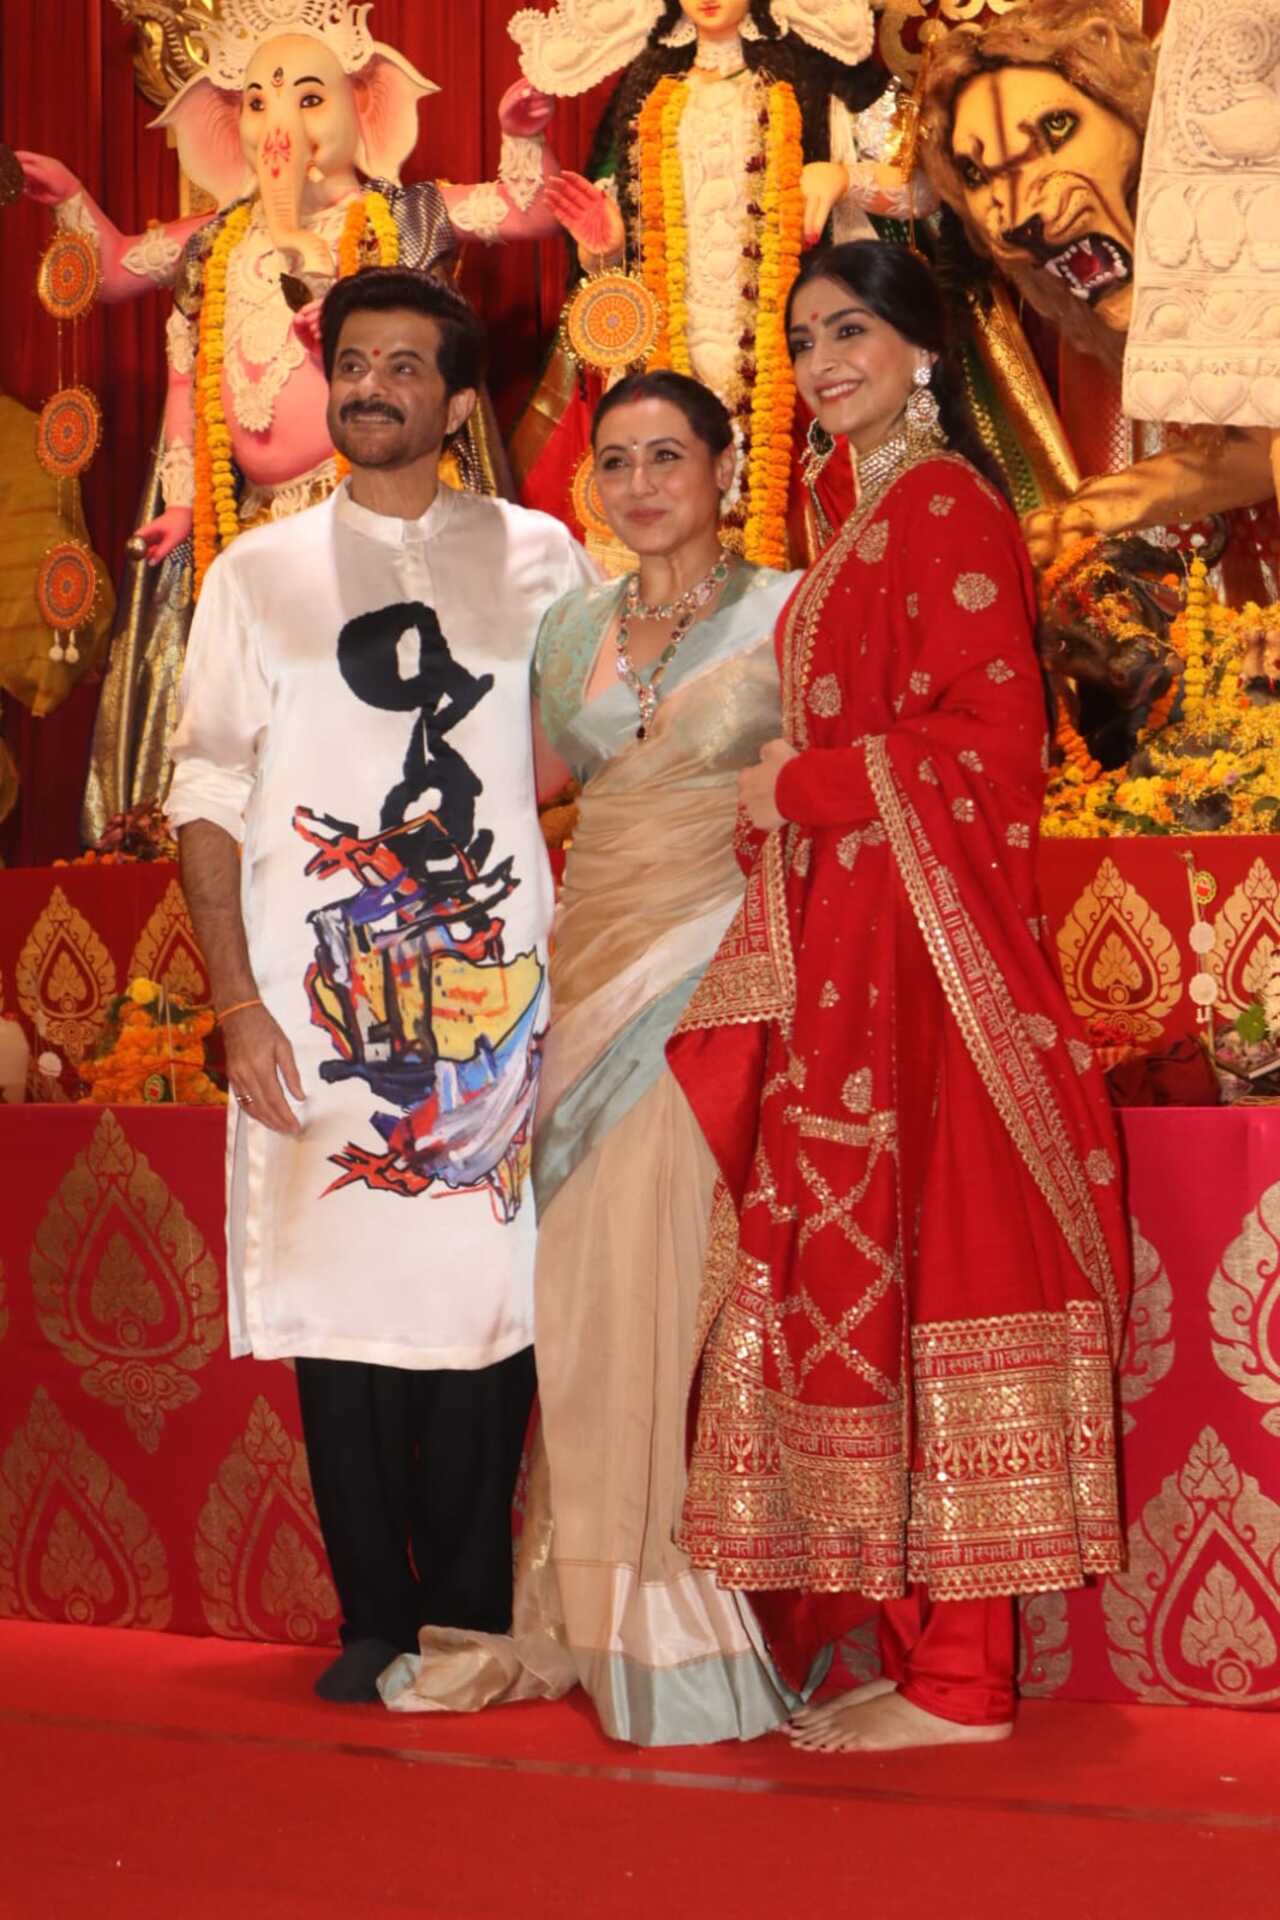 Anil and Sonam posed with Rani